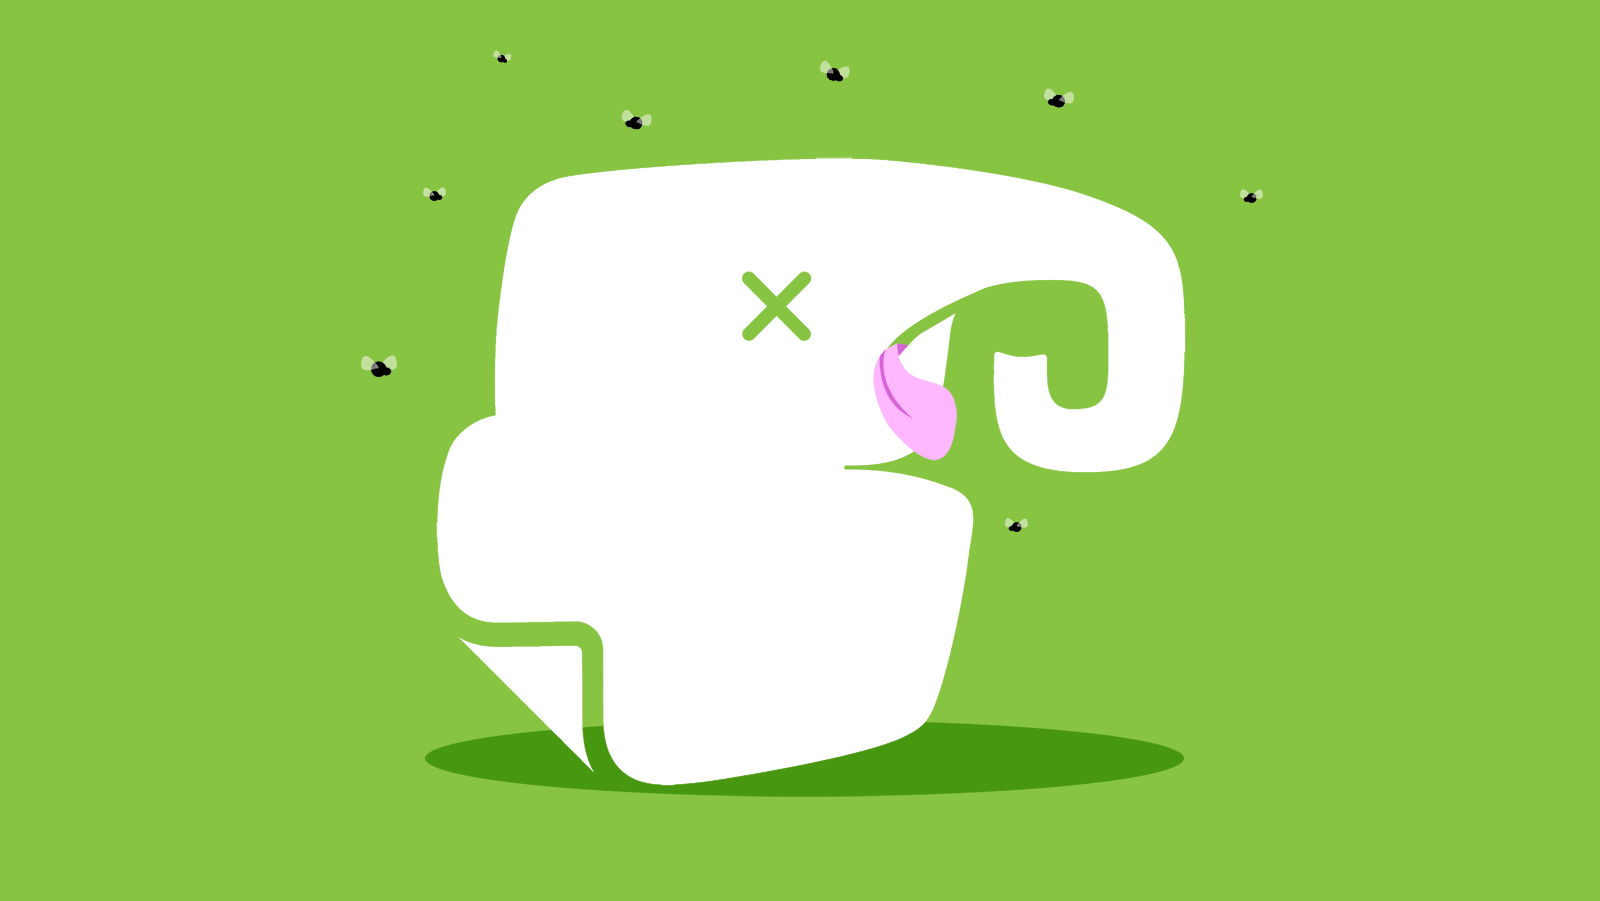 Evernote is dead